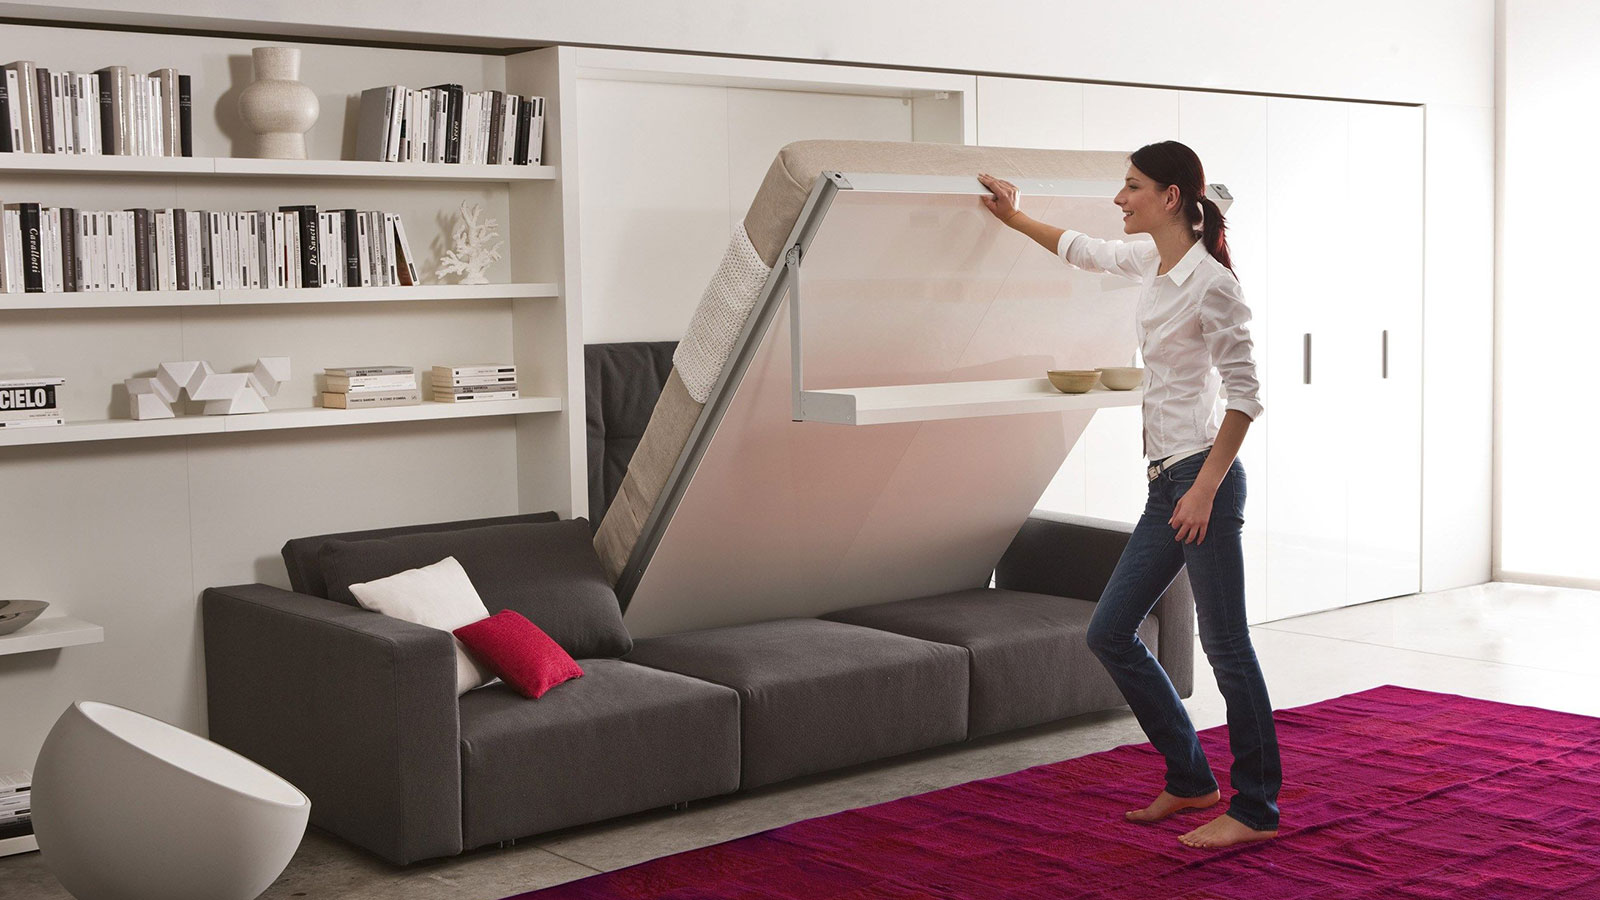 These 10 Modern Murphy Beds Will Help You Maximize Space In Your Small Home 10 Stunning Homes,Nursing Jobs From Home Near Me